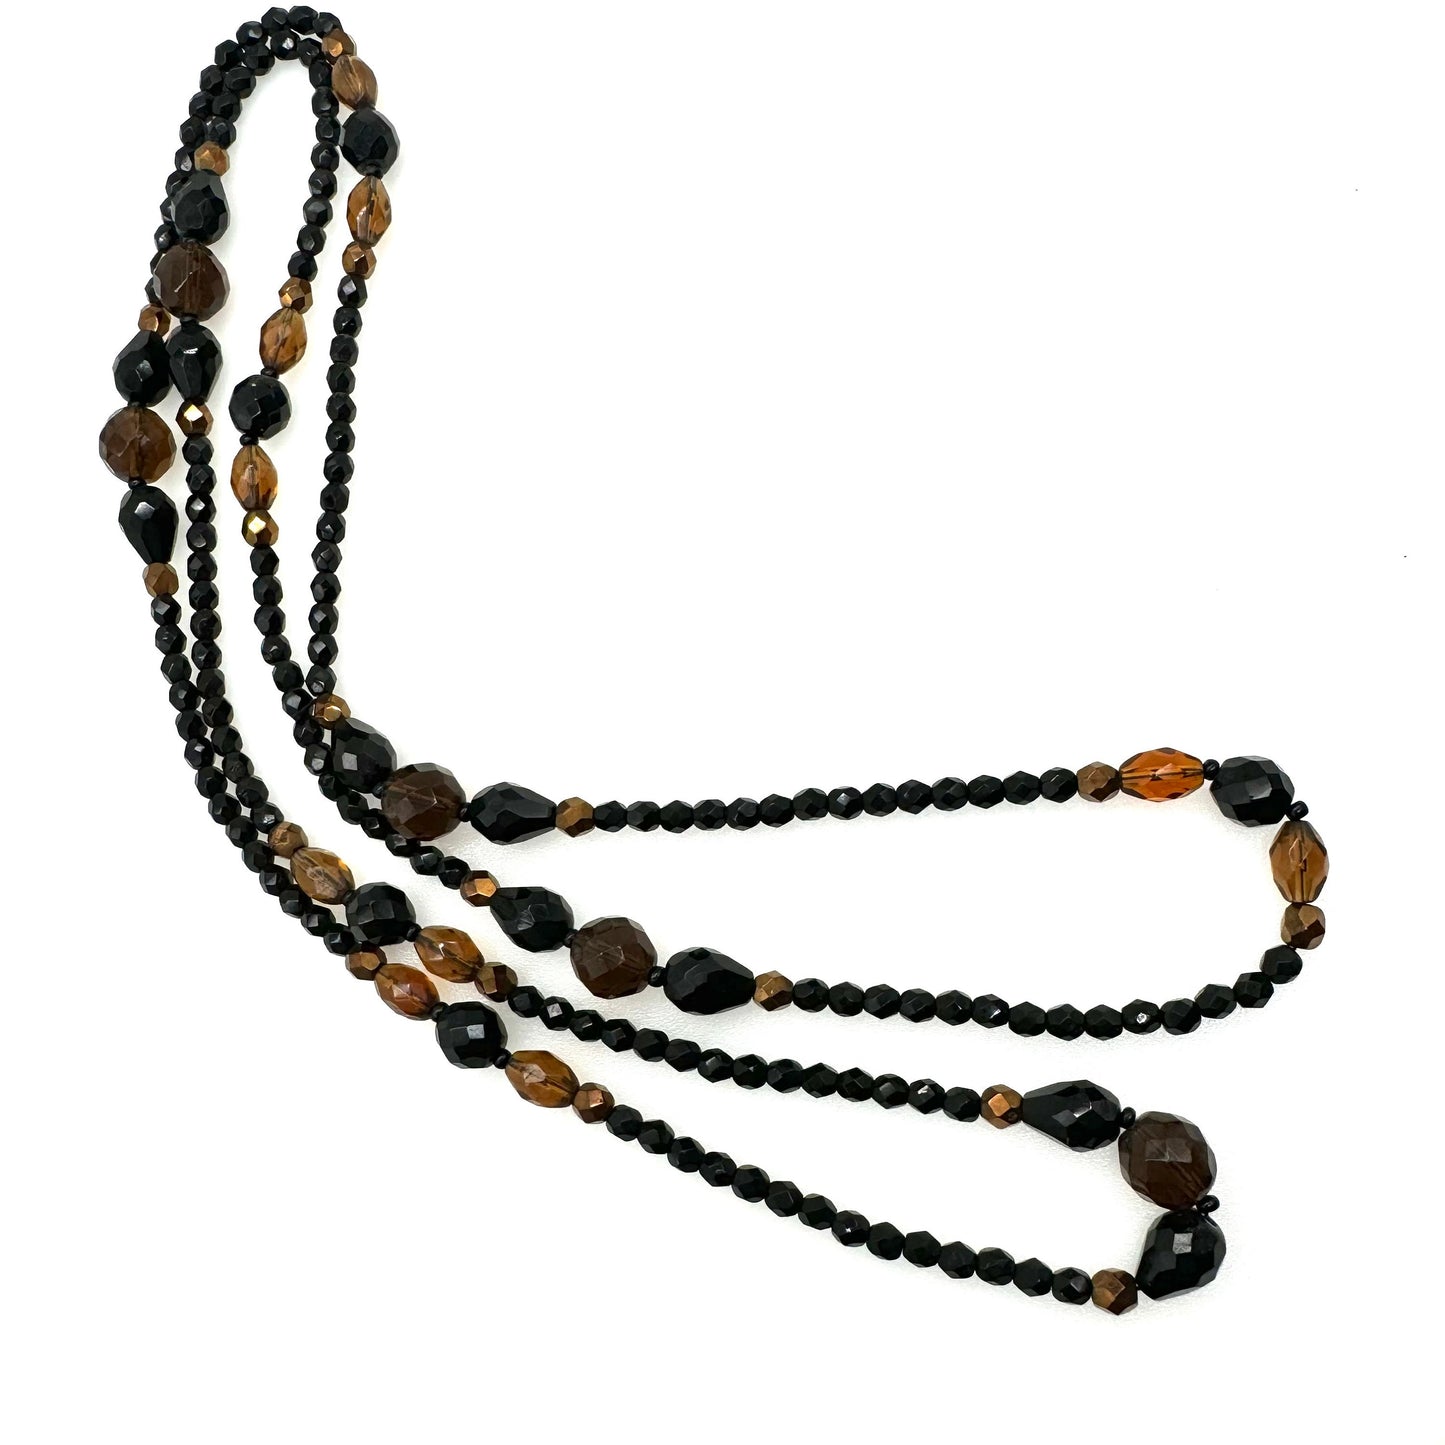 Long Black, Cognac and Smokey Vari Shape Faceted Glass Bead Necklace